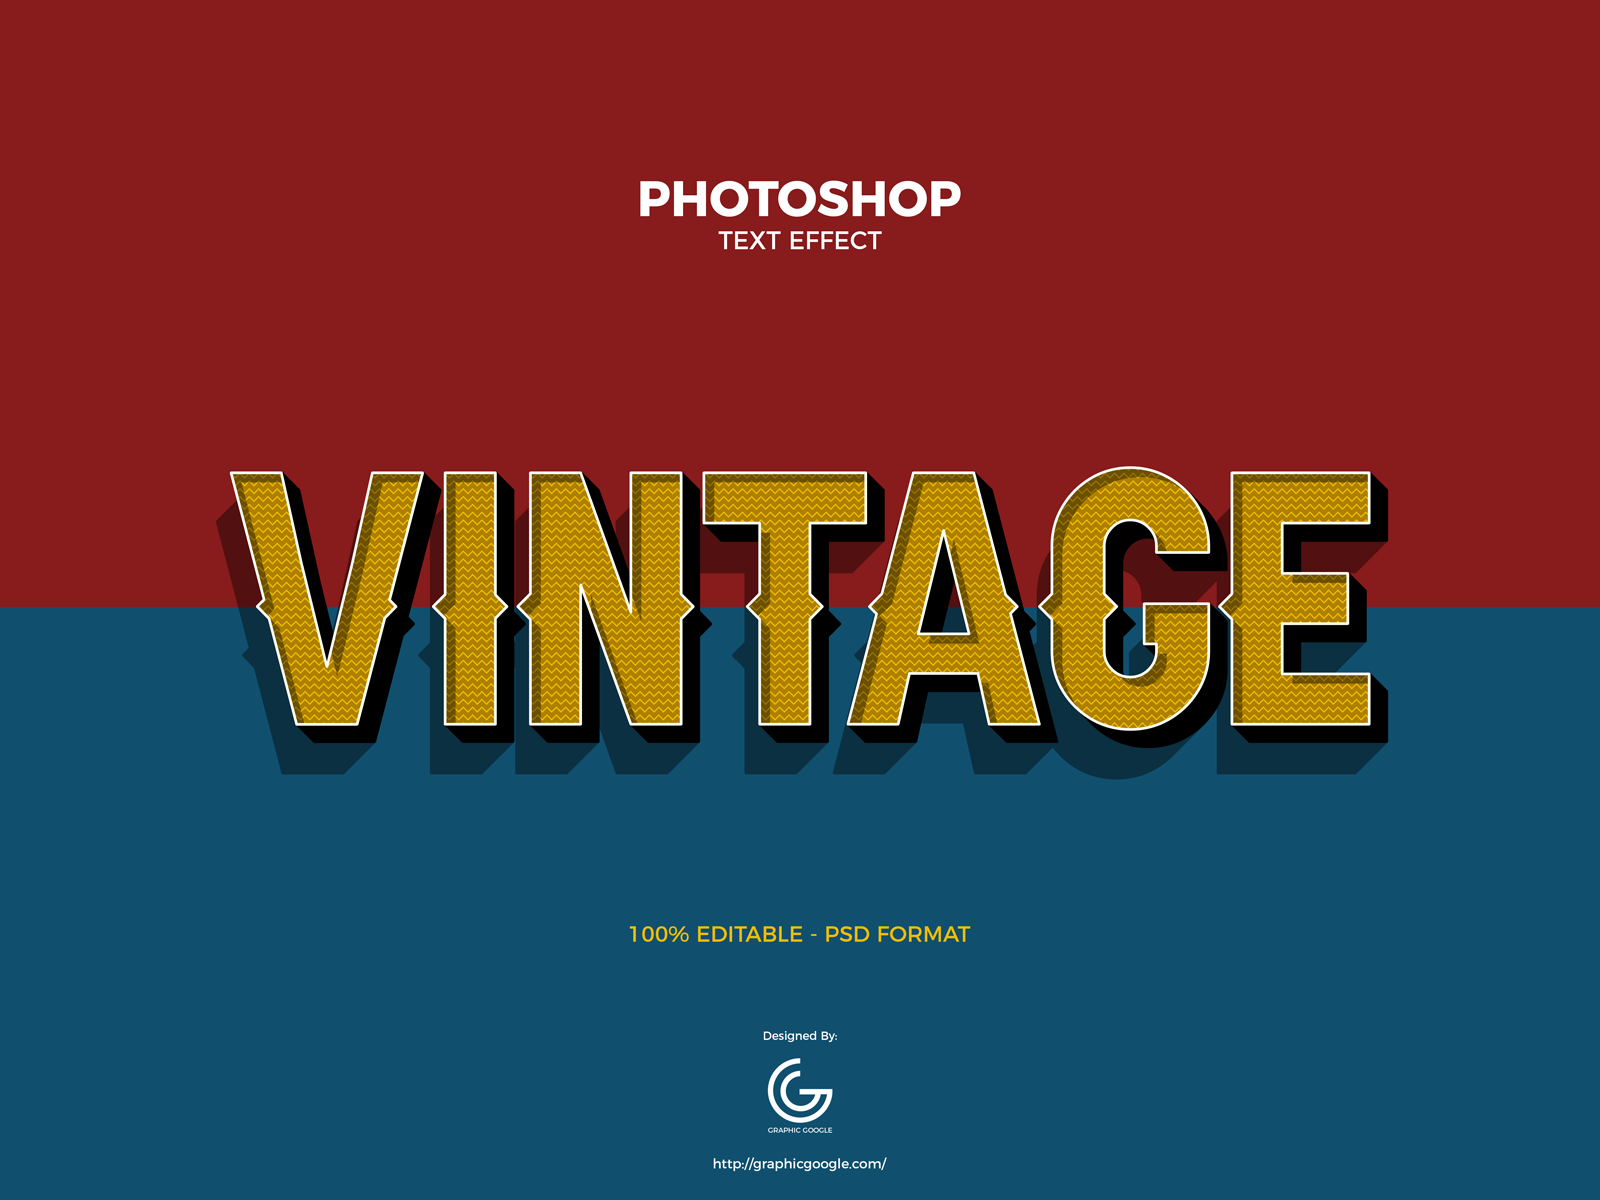 Free Vintage Photoshop Text Effect by Graphic Google on Dribbble